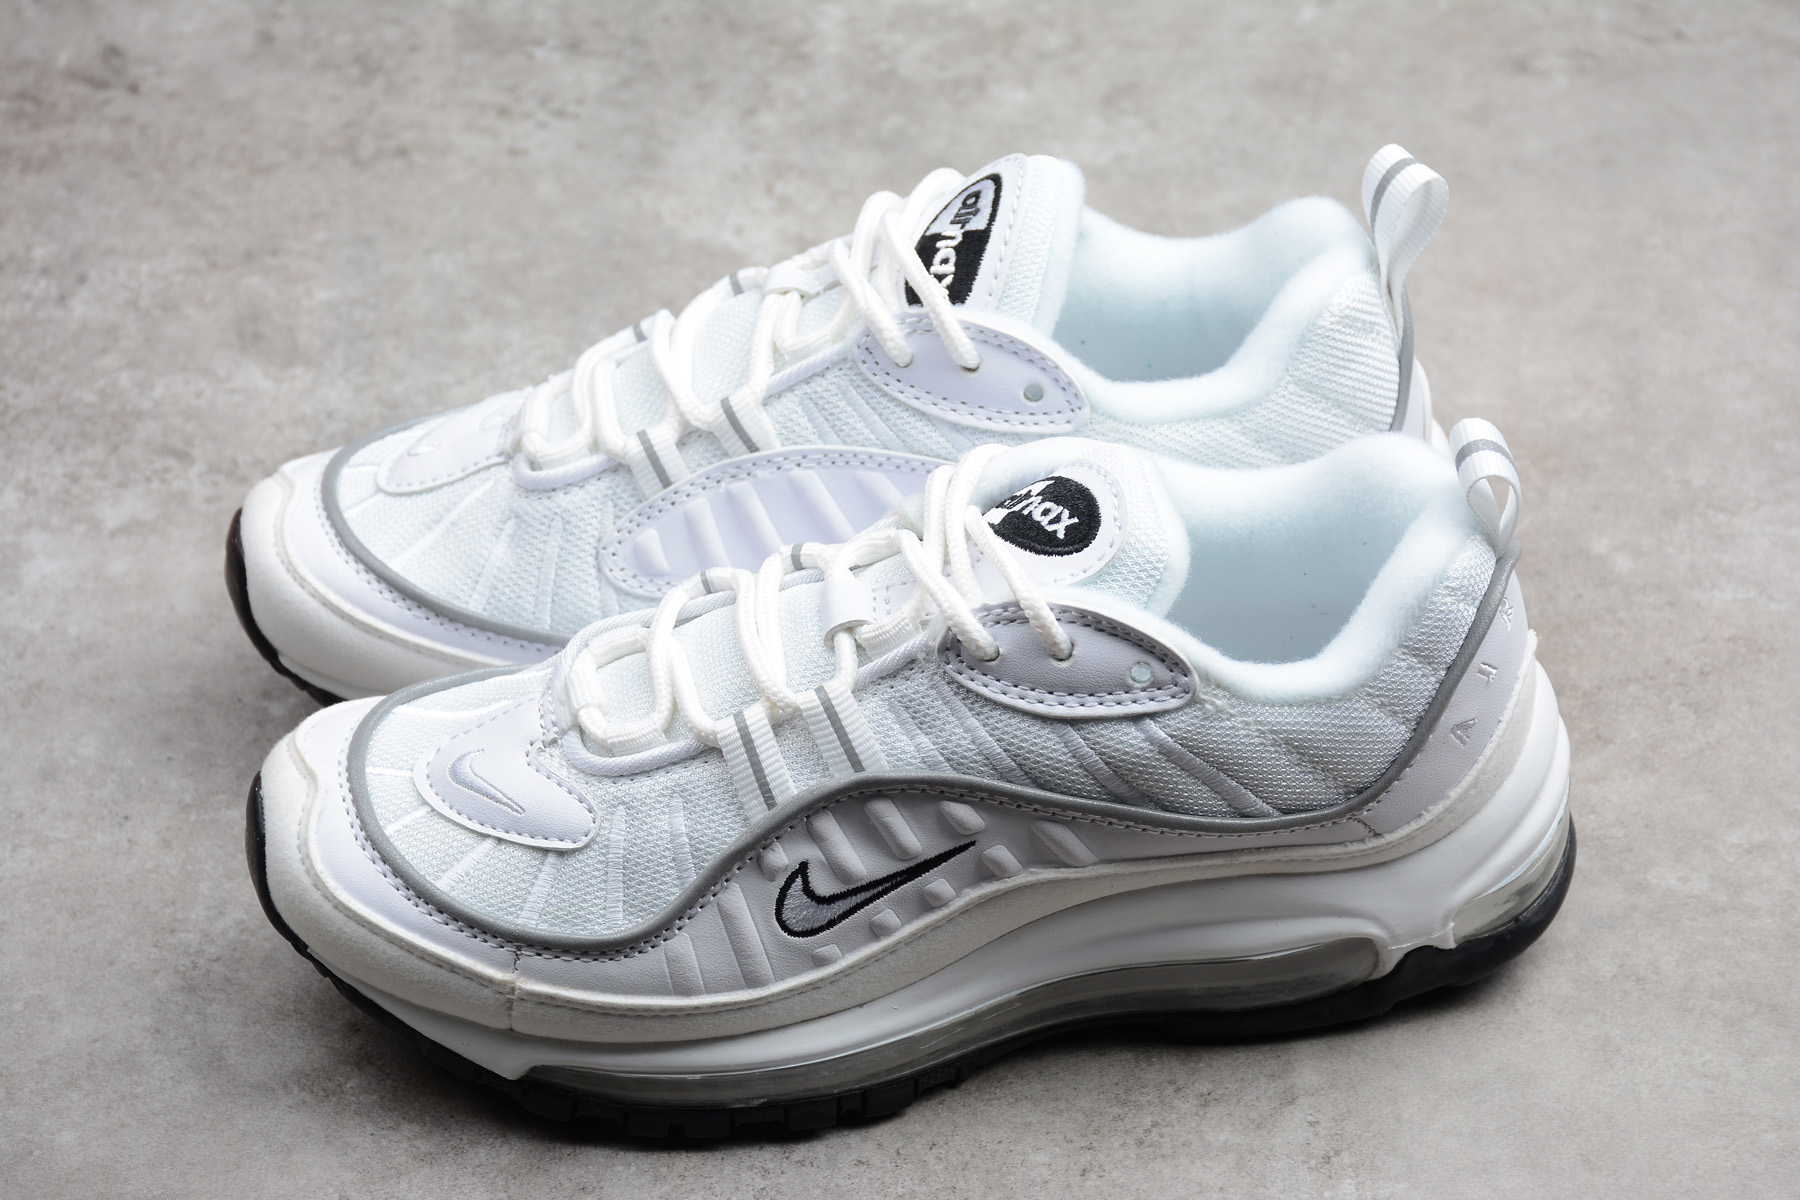 Nike Air Max 98 White/Reflective Silver AH6799-103 For Sale